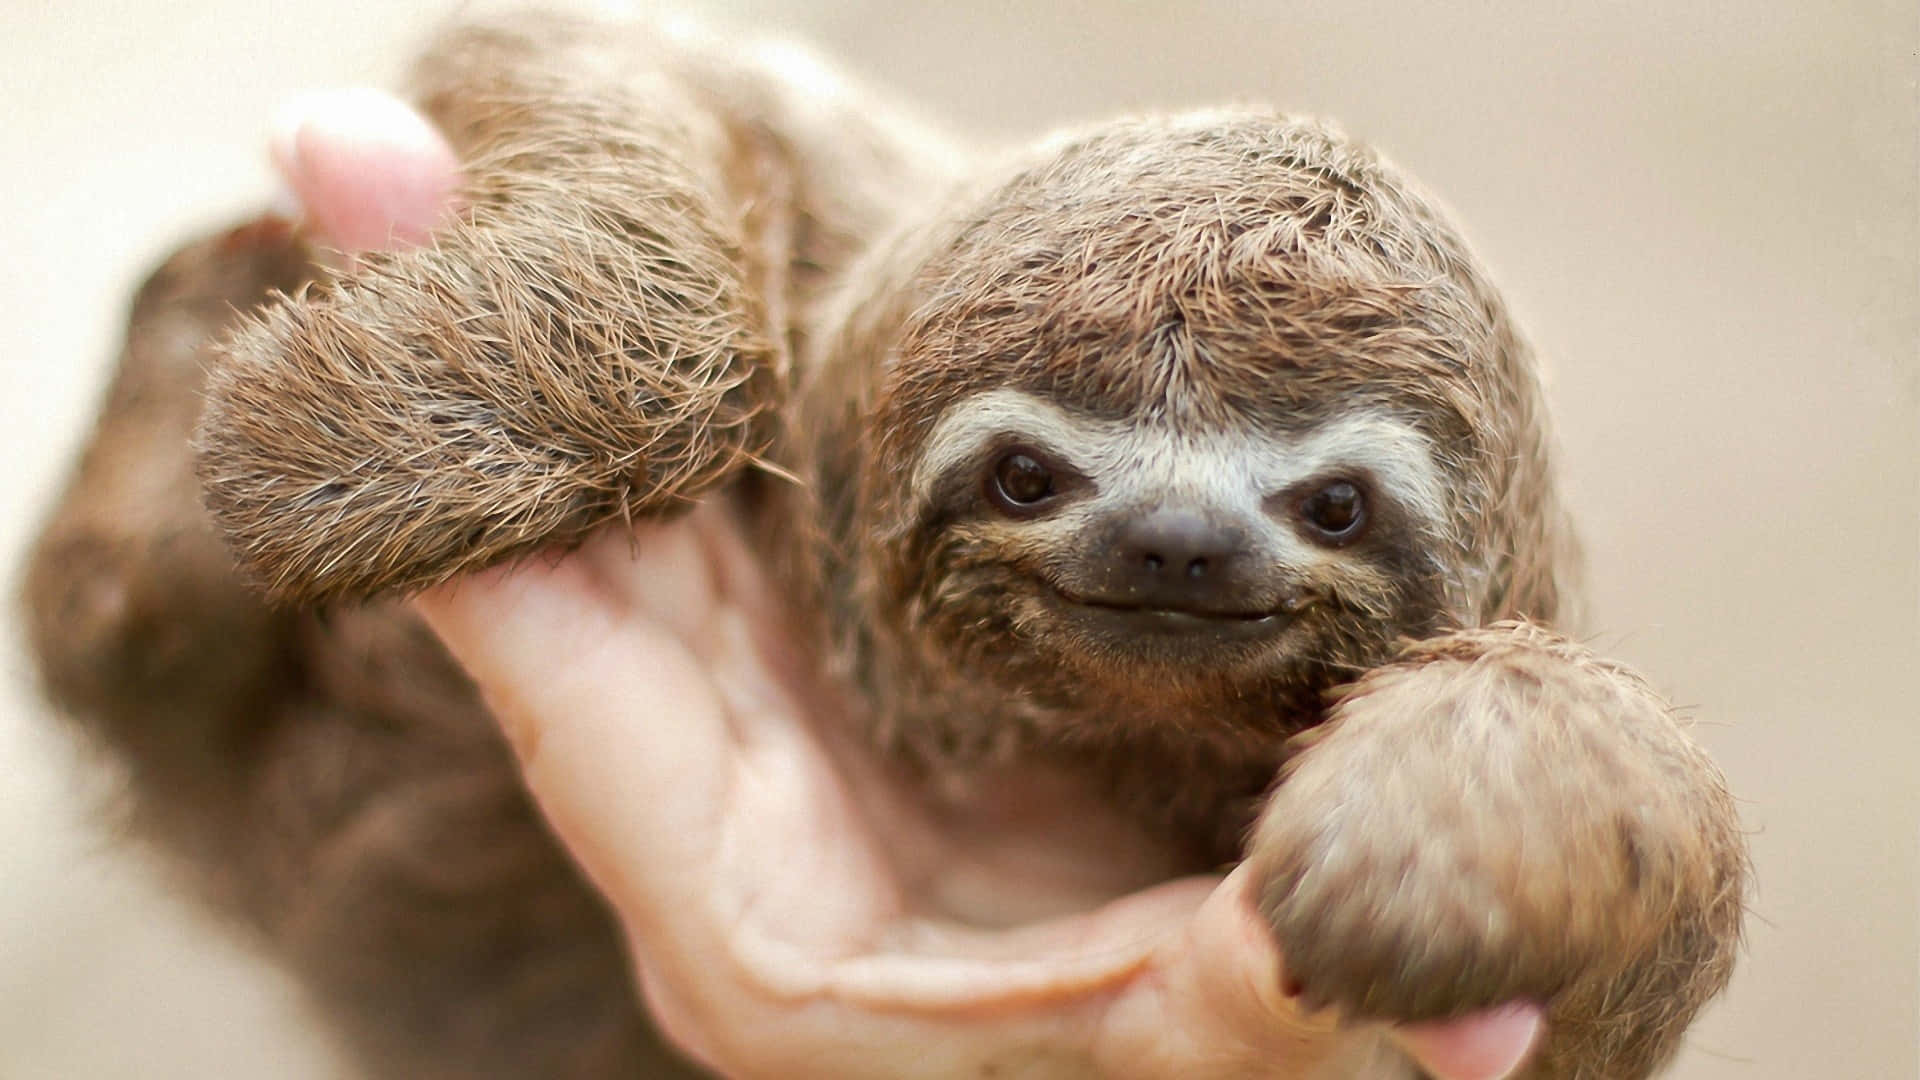 Slink Slowly With an Adorable Sloth